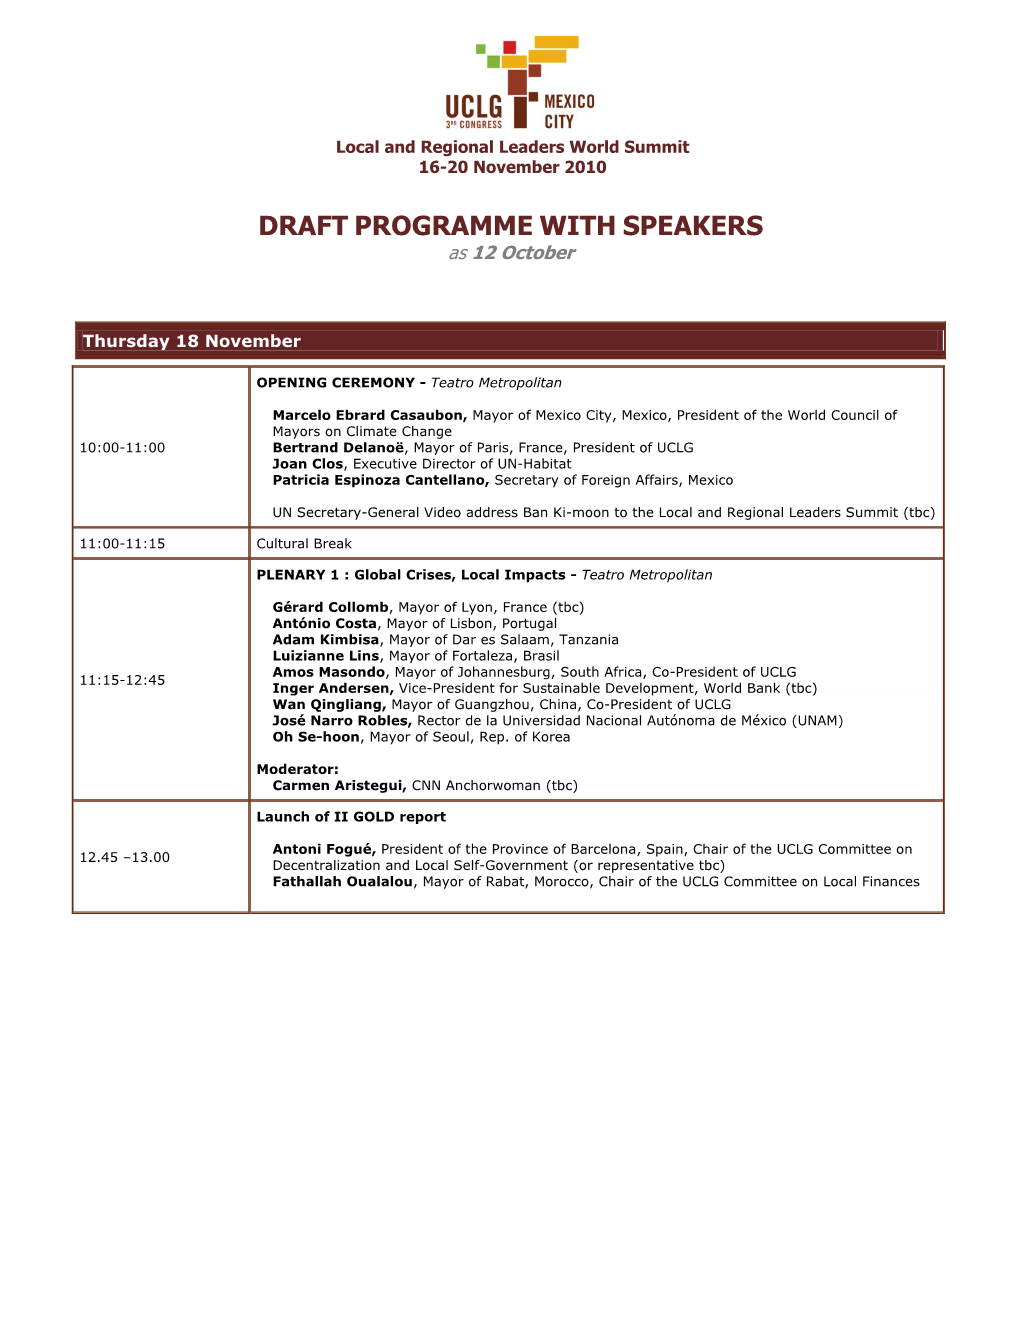 UCLG Programme As of 22Oct2010